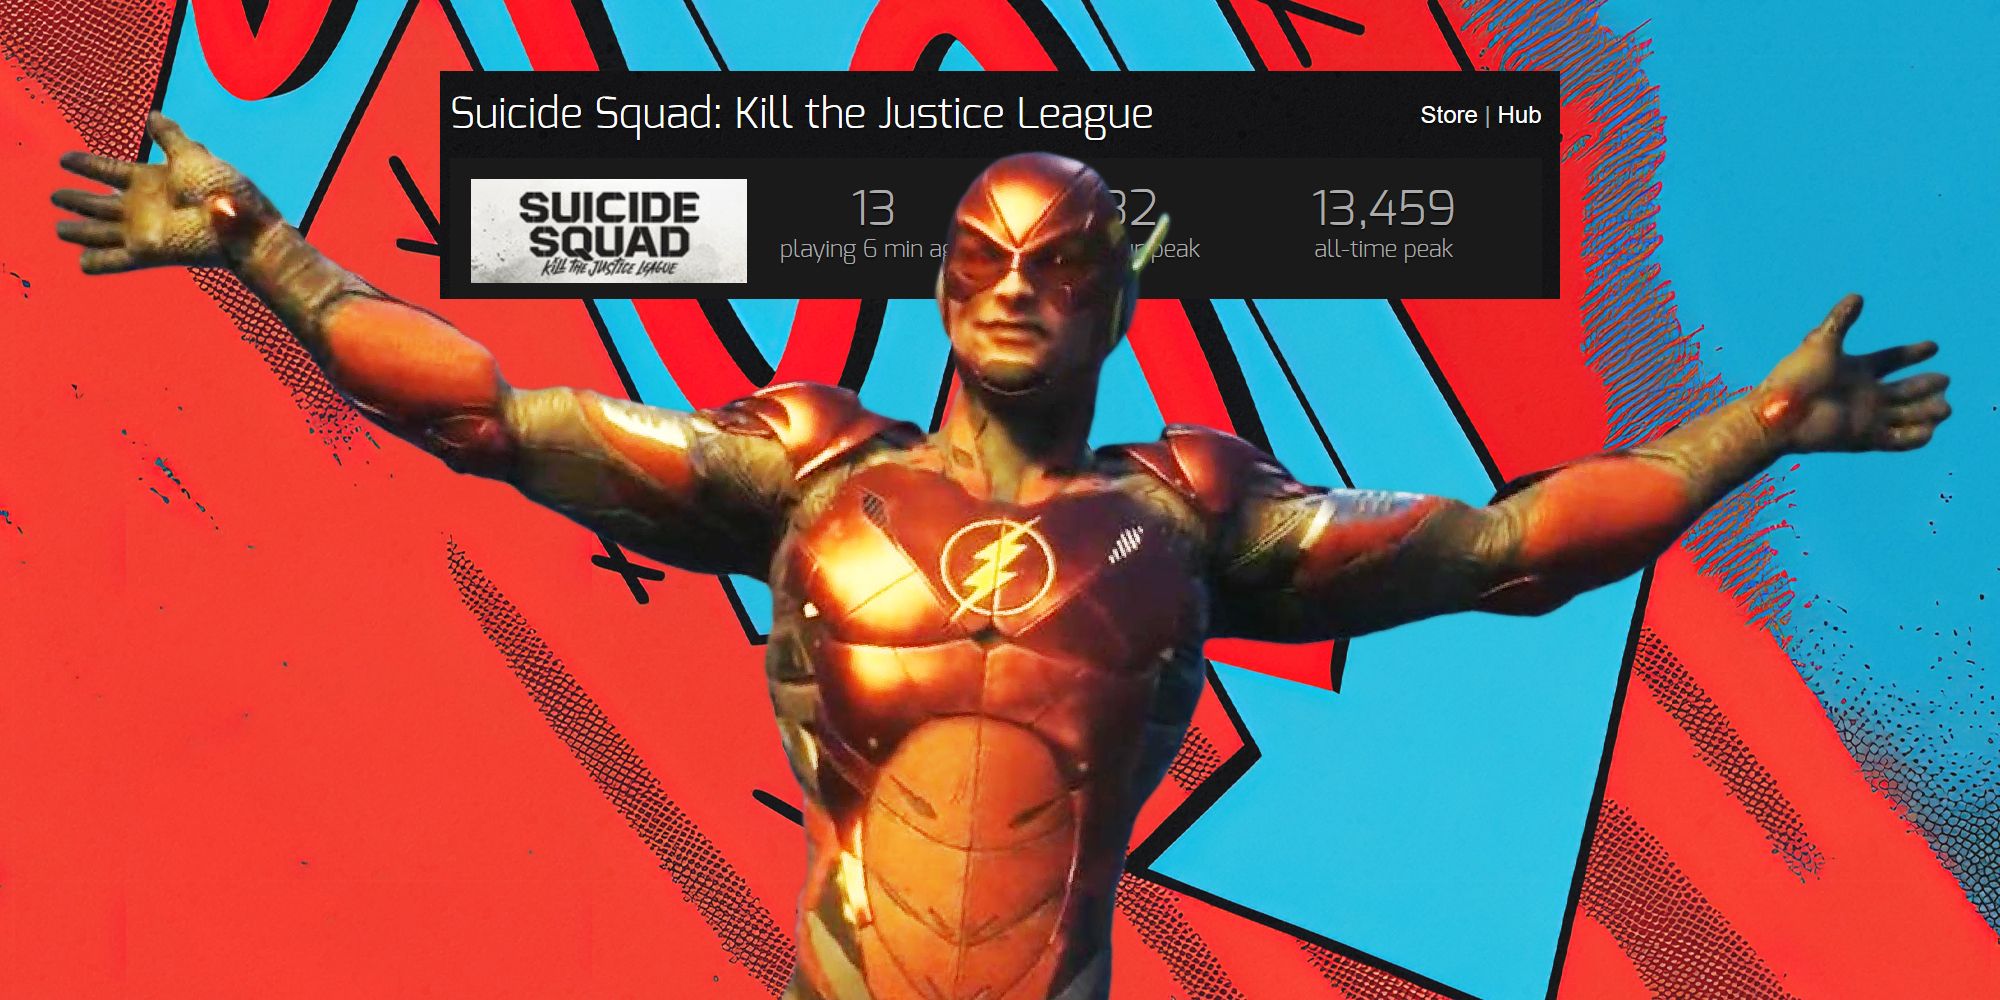 Suicide Squad: Kill the Justice League Reveals Early Access Times